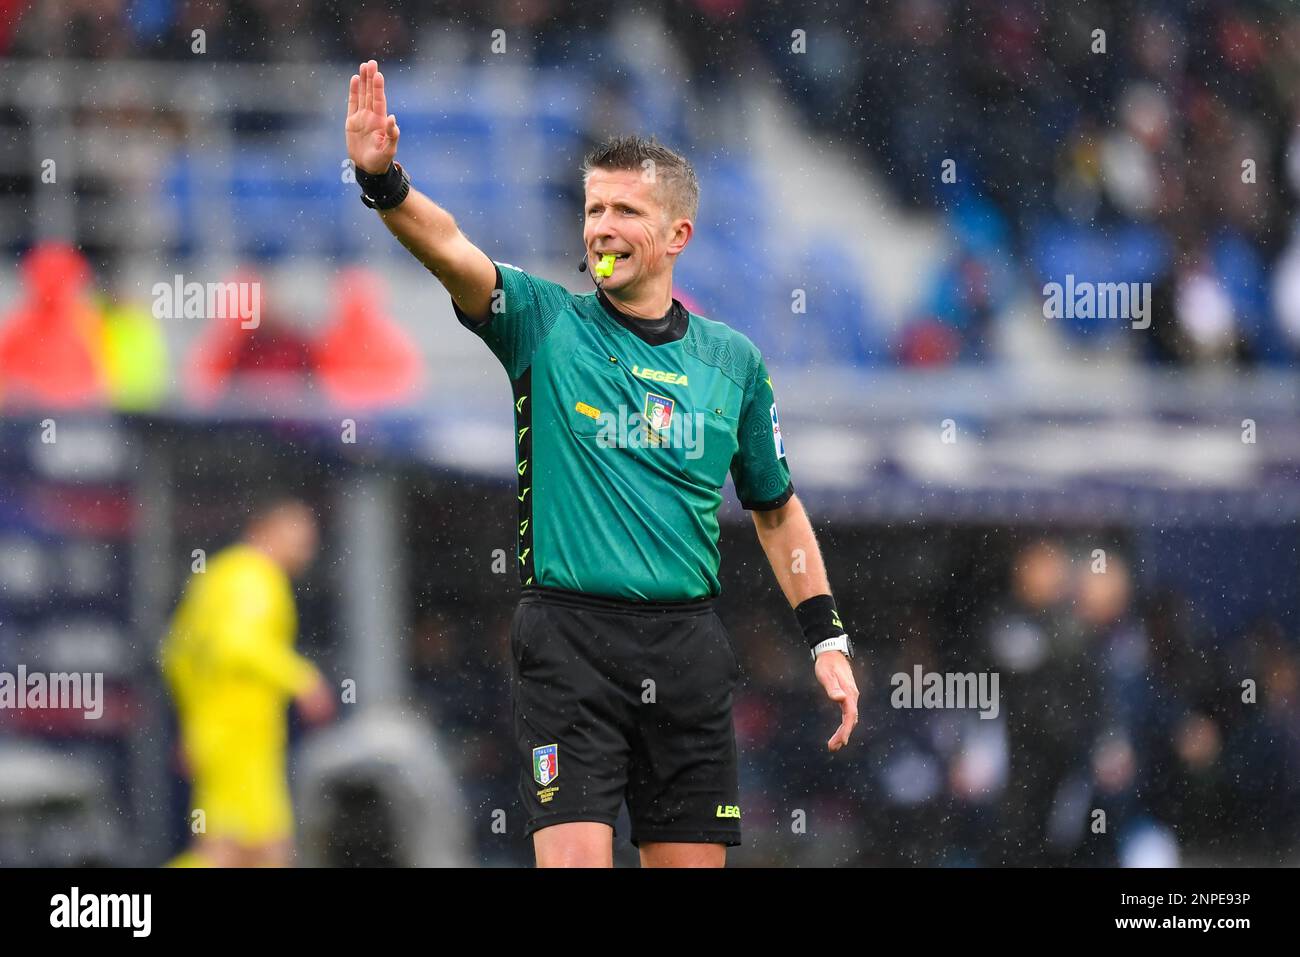 The Referee of the match Daniele Orsato of the Schio Section  during  Bologna FC vs Inter - FC Internazionale, italian soccer Serie A match in Bologna, Italy, February 26 2023 Stock Photo